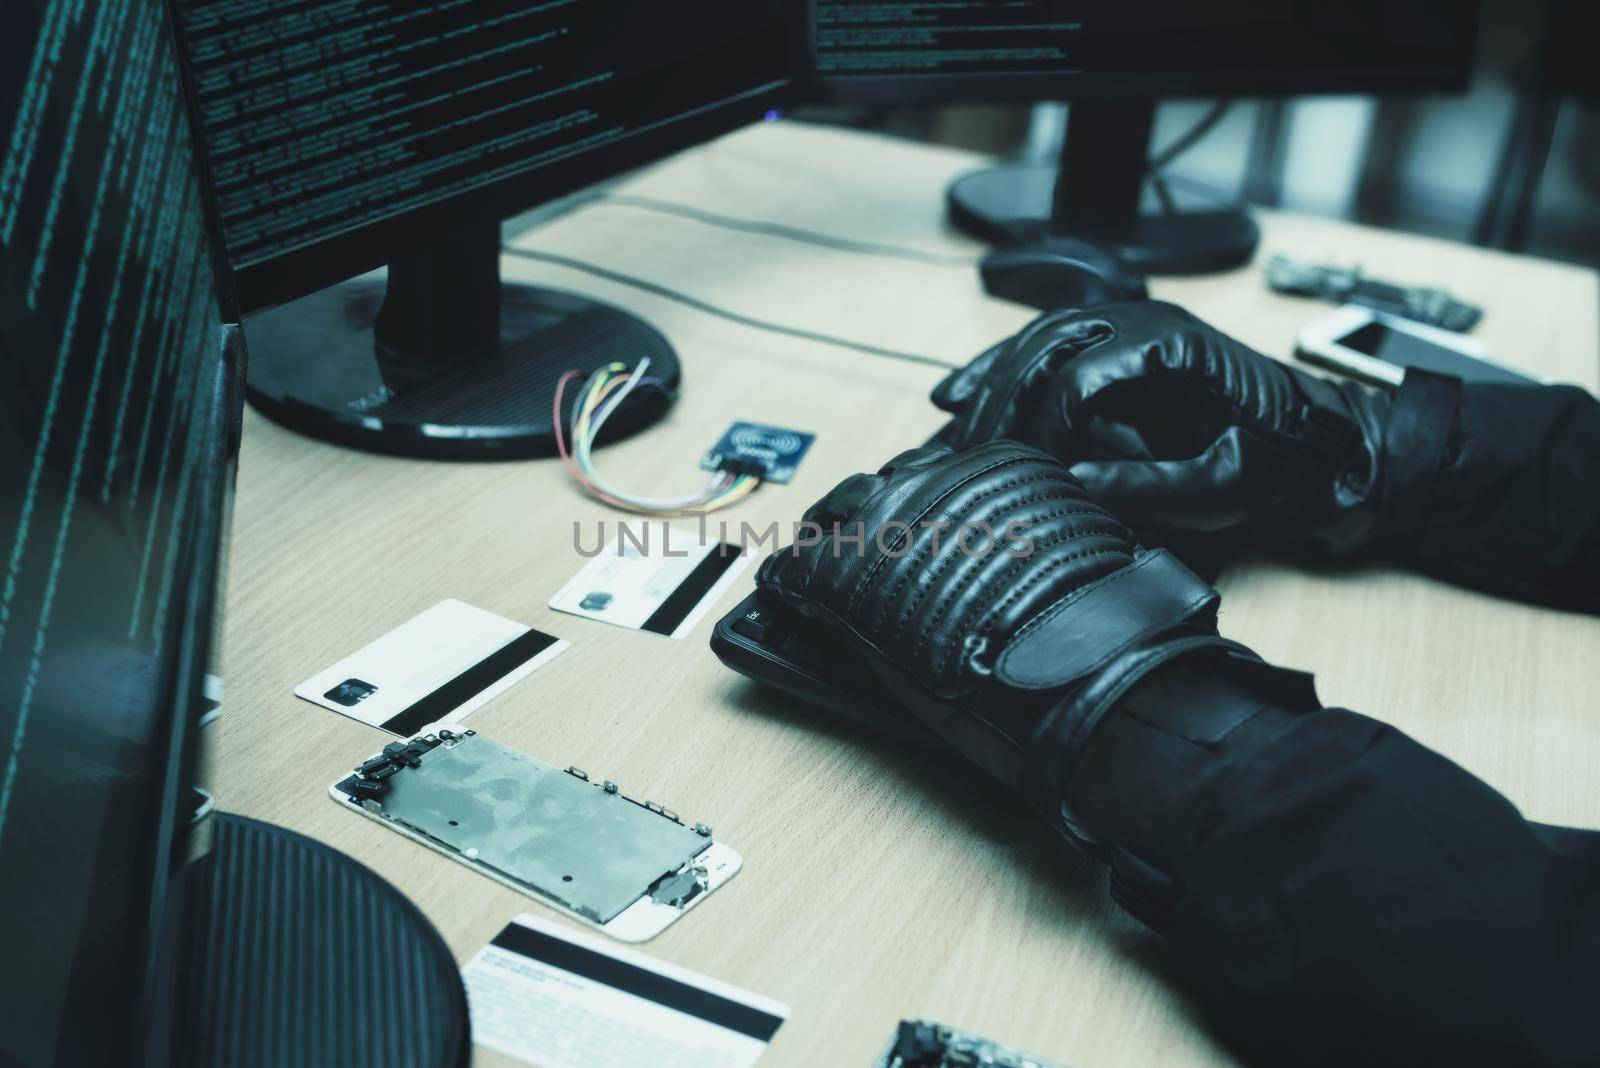 Shot from the Back to Hacker Breaking into Corporate Data Servers from His Underground Hideout. close view of hackers hands by Nickstock